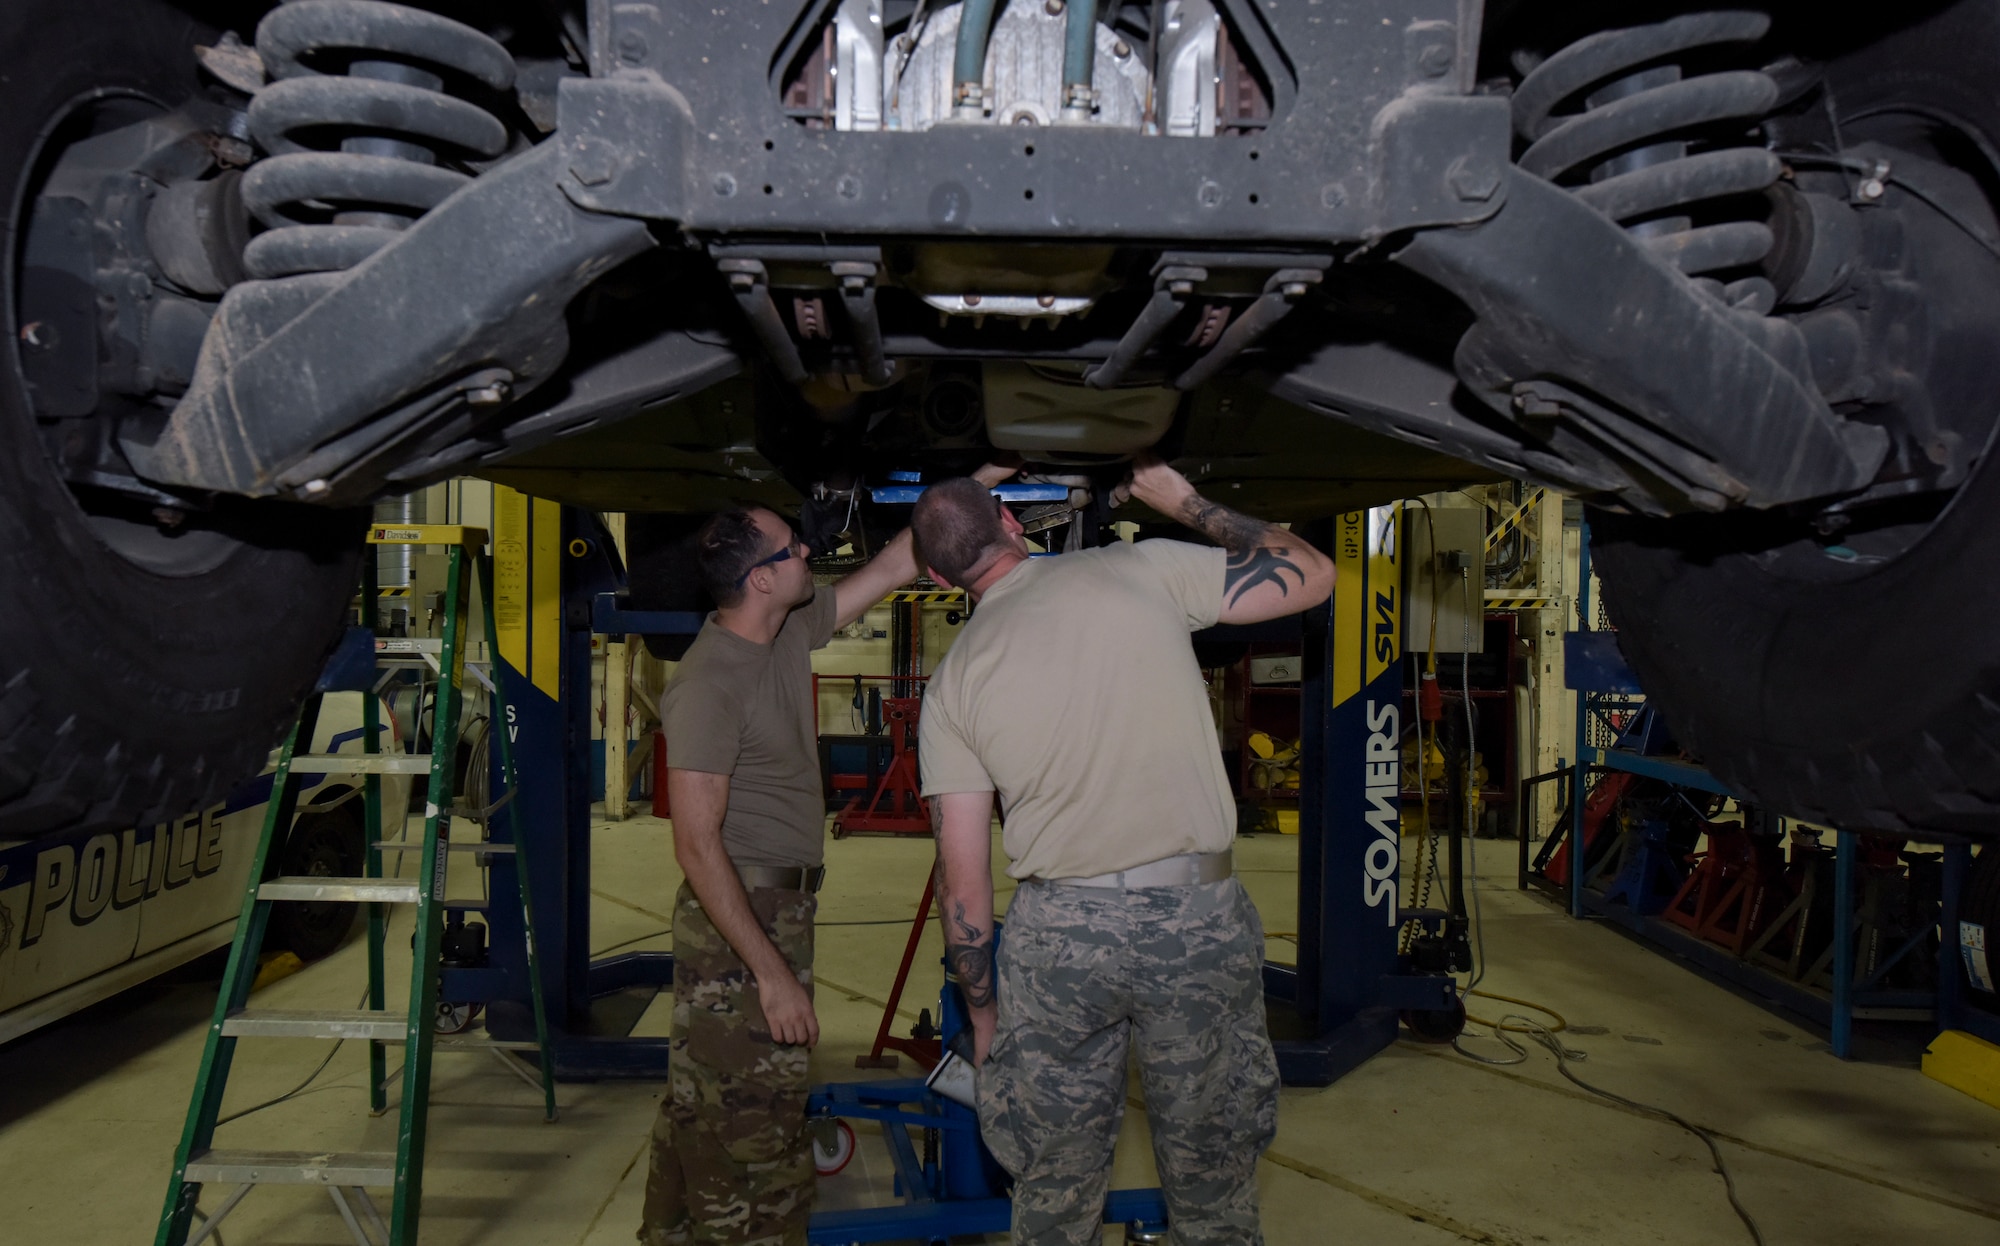 Texas Air National Guardsmen Airman 1st Class Ryan Doan, 221st Combat Communications Squadron vehicle mechanic, Naval Air Station Joint Reserve Base Fort Worth, Texas, left, and Master Sgt. Brandon Isam, 221st Combat Communications Squadron NCO-in-charge of vehicle maintenance, check the under carriage of a 100th Logistics Readiness Squadron assigned vehicle at RAF Mildenhall, England, July 30, 2019. The guardsmen conducted annual vehicle maintenance training with the 100 LRS here. (U.S. Air Force photo by Senior Airman Alexandria Lee)